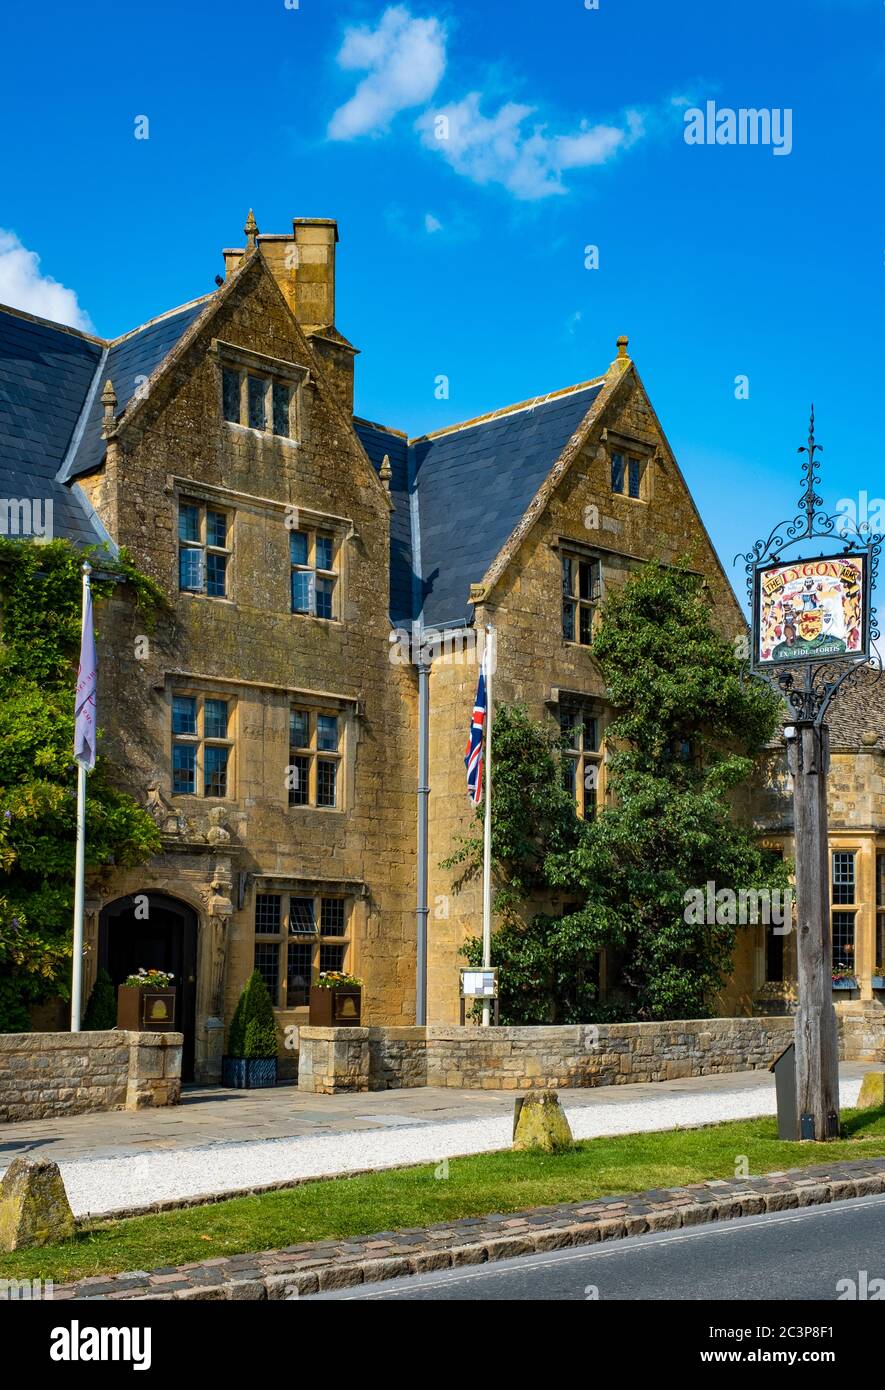 The Lygon Arms in Broadway, Worcestershire, England, Europe. Stock Photo